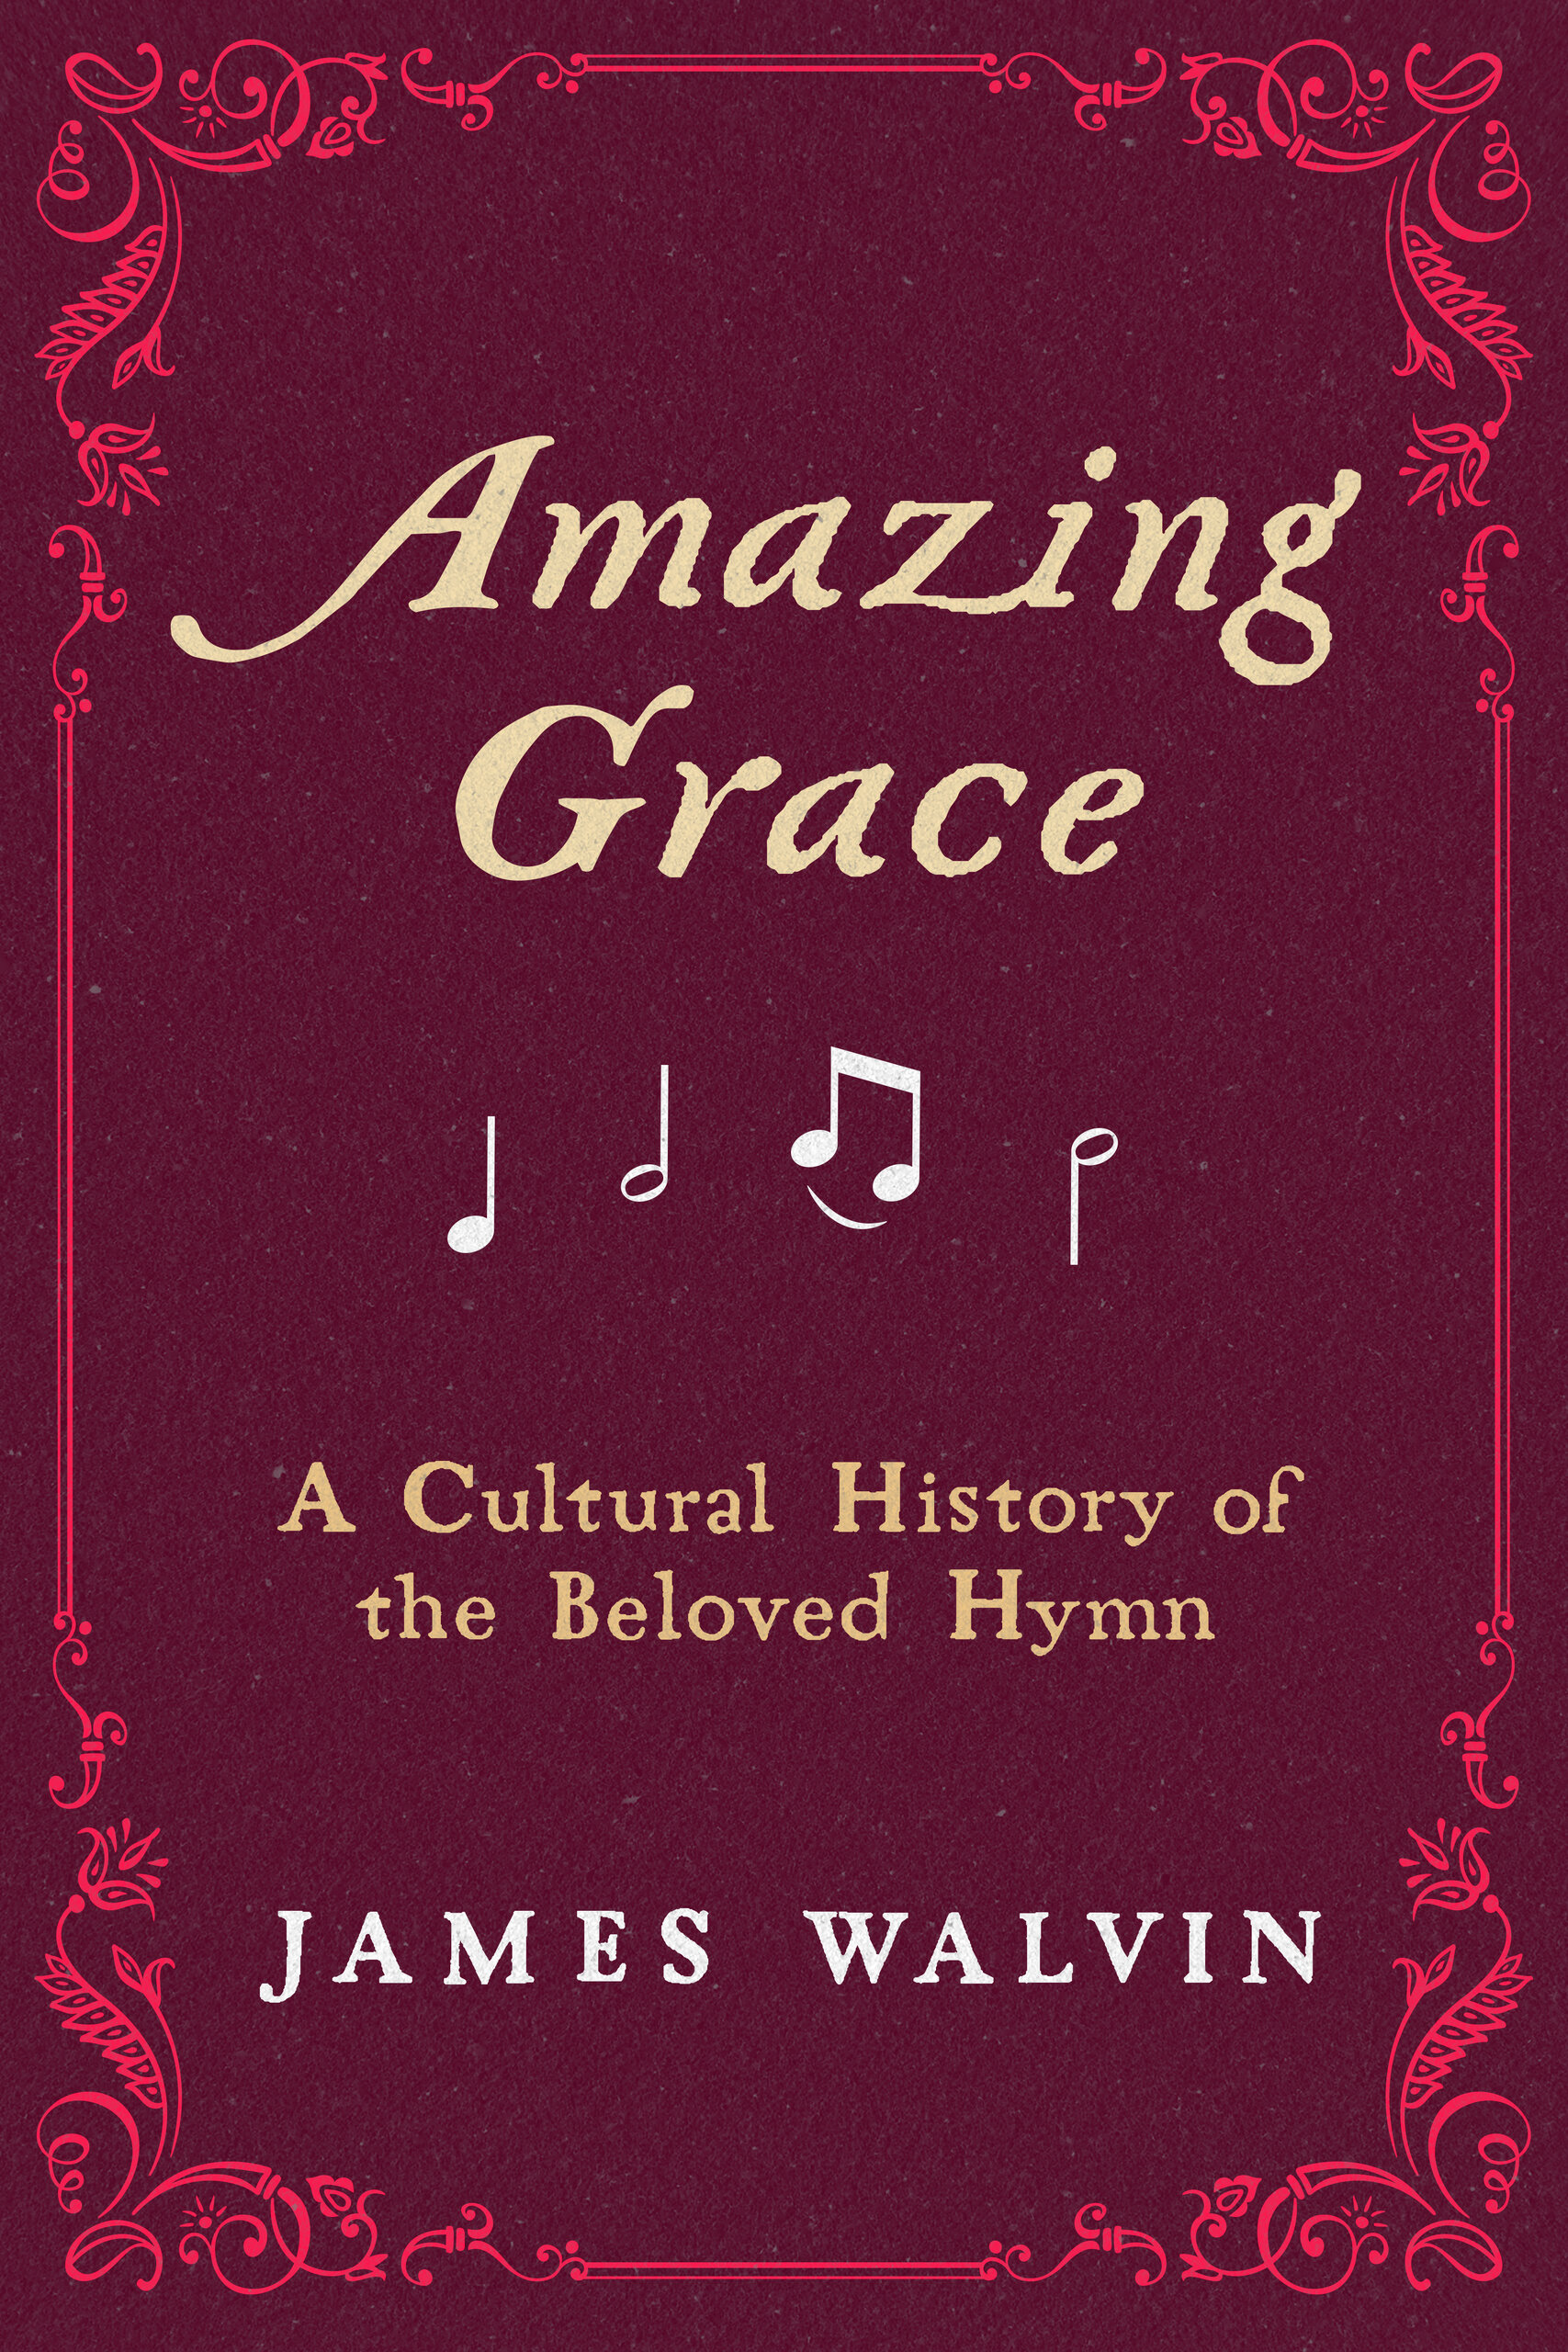 University of California Press Publishes a New Book on ‘Amazing Grace’